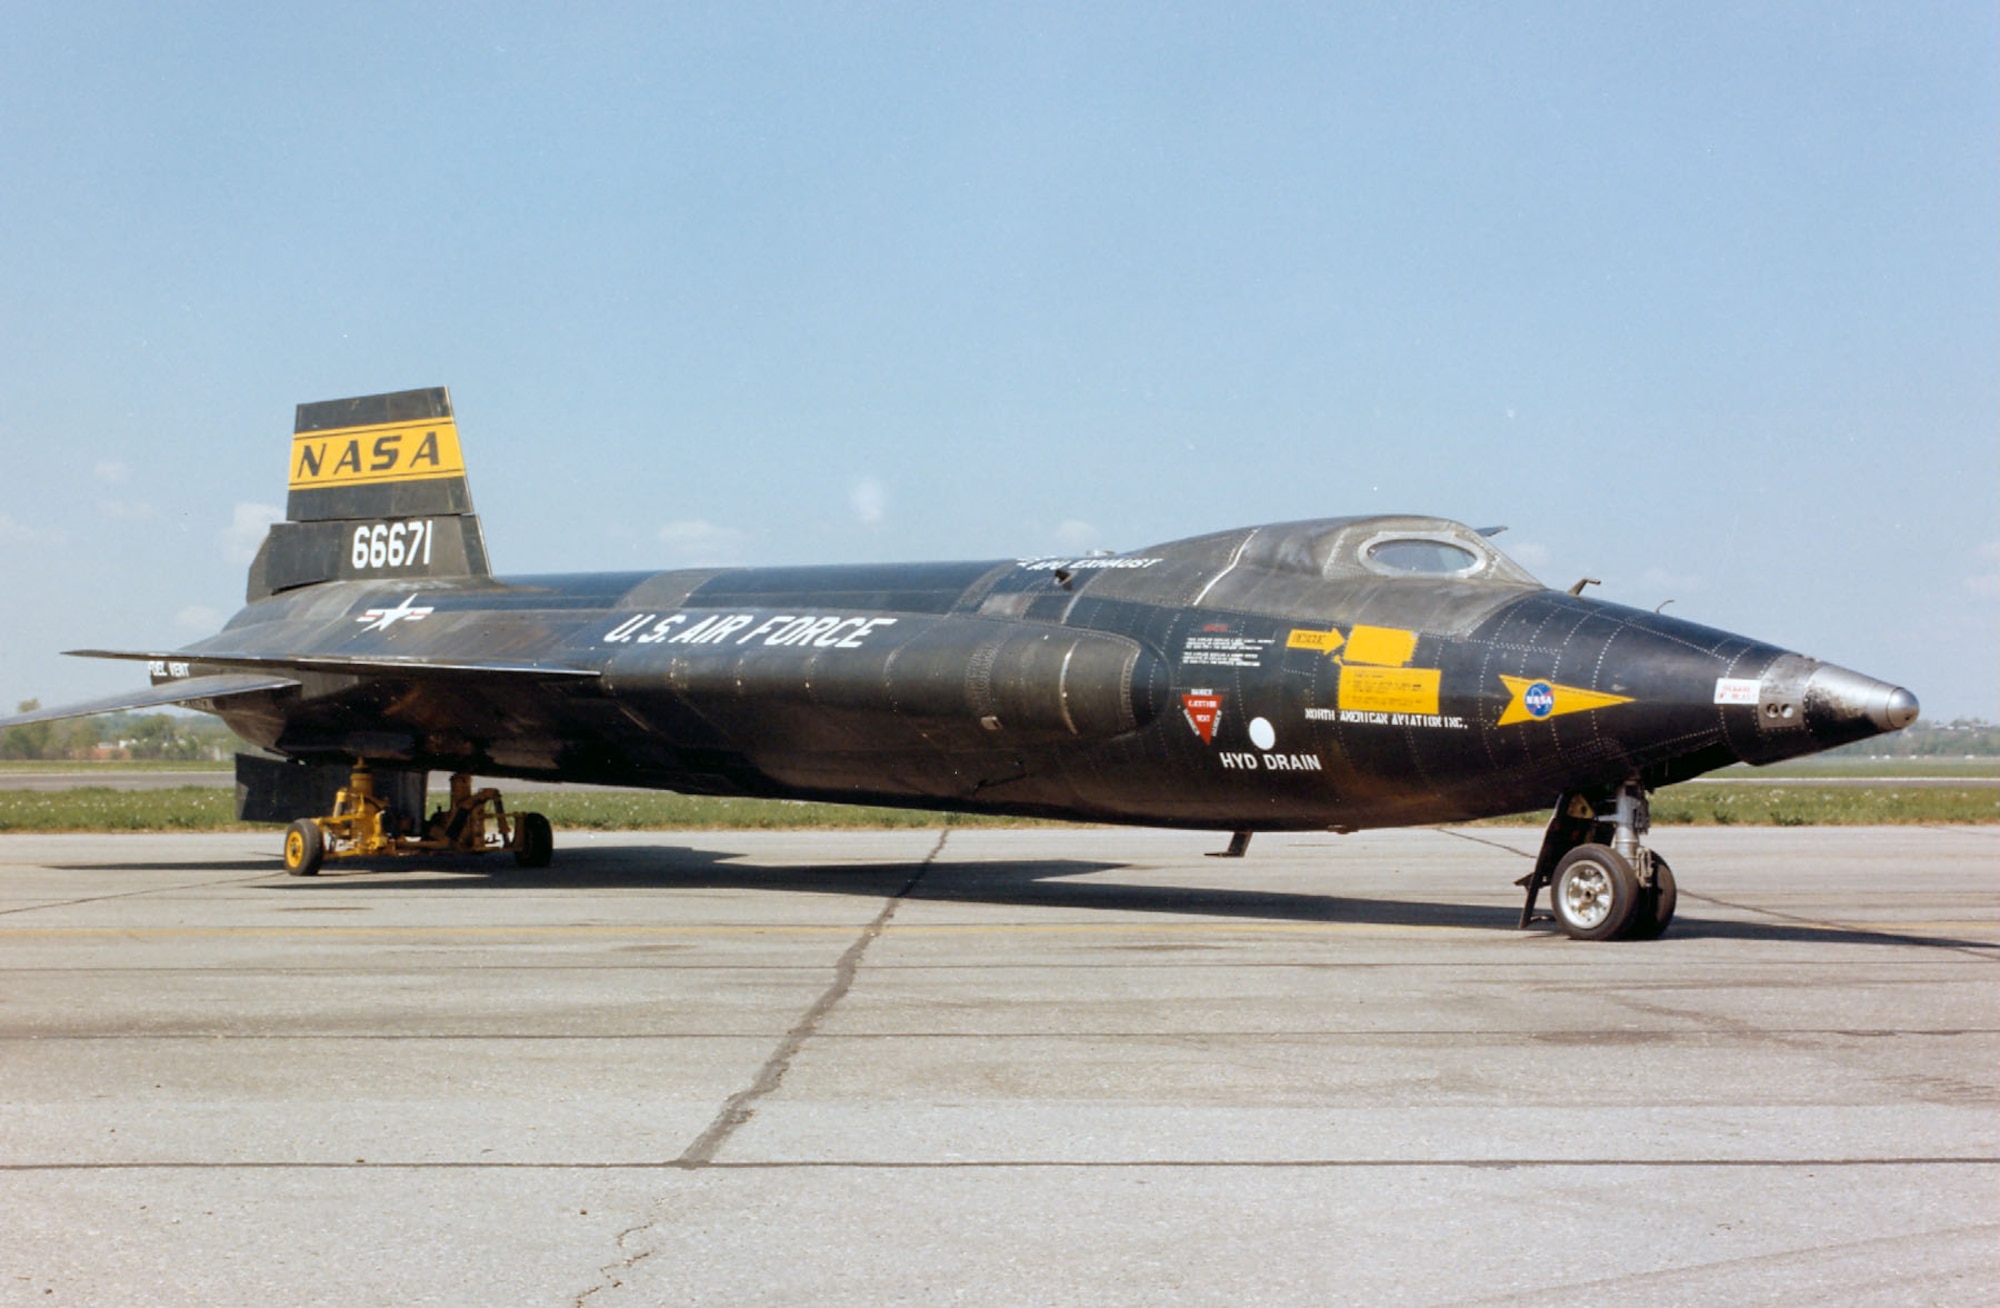 DAYTON, Ohio -- North American X-15A-2 at the National Museum of the United States Air Force. (U.S. Air Force photo)